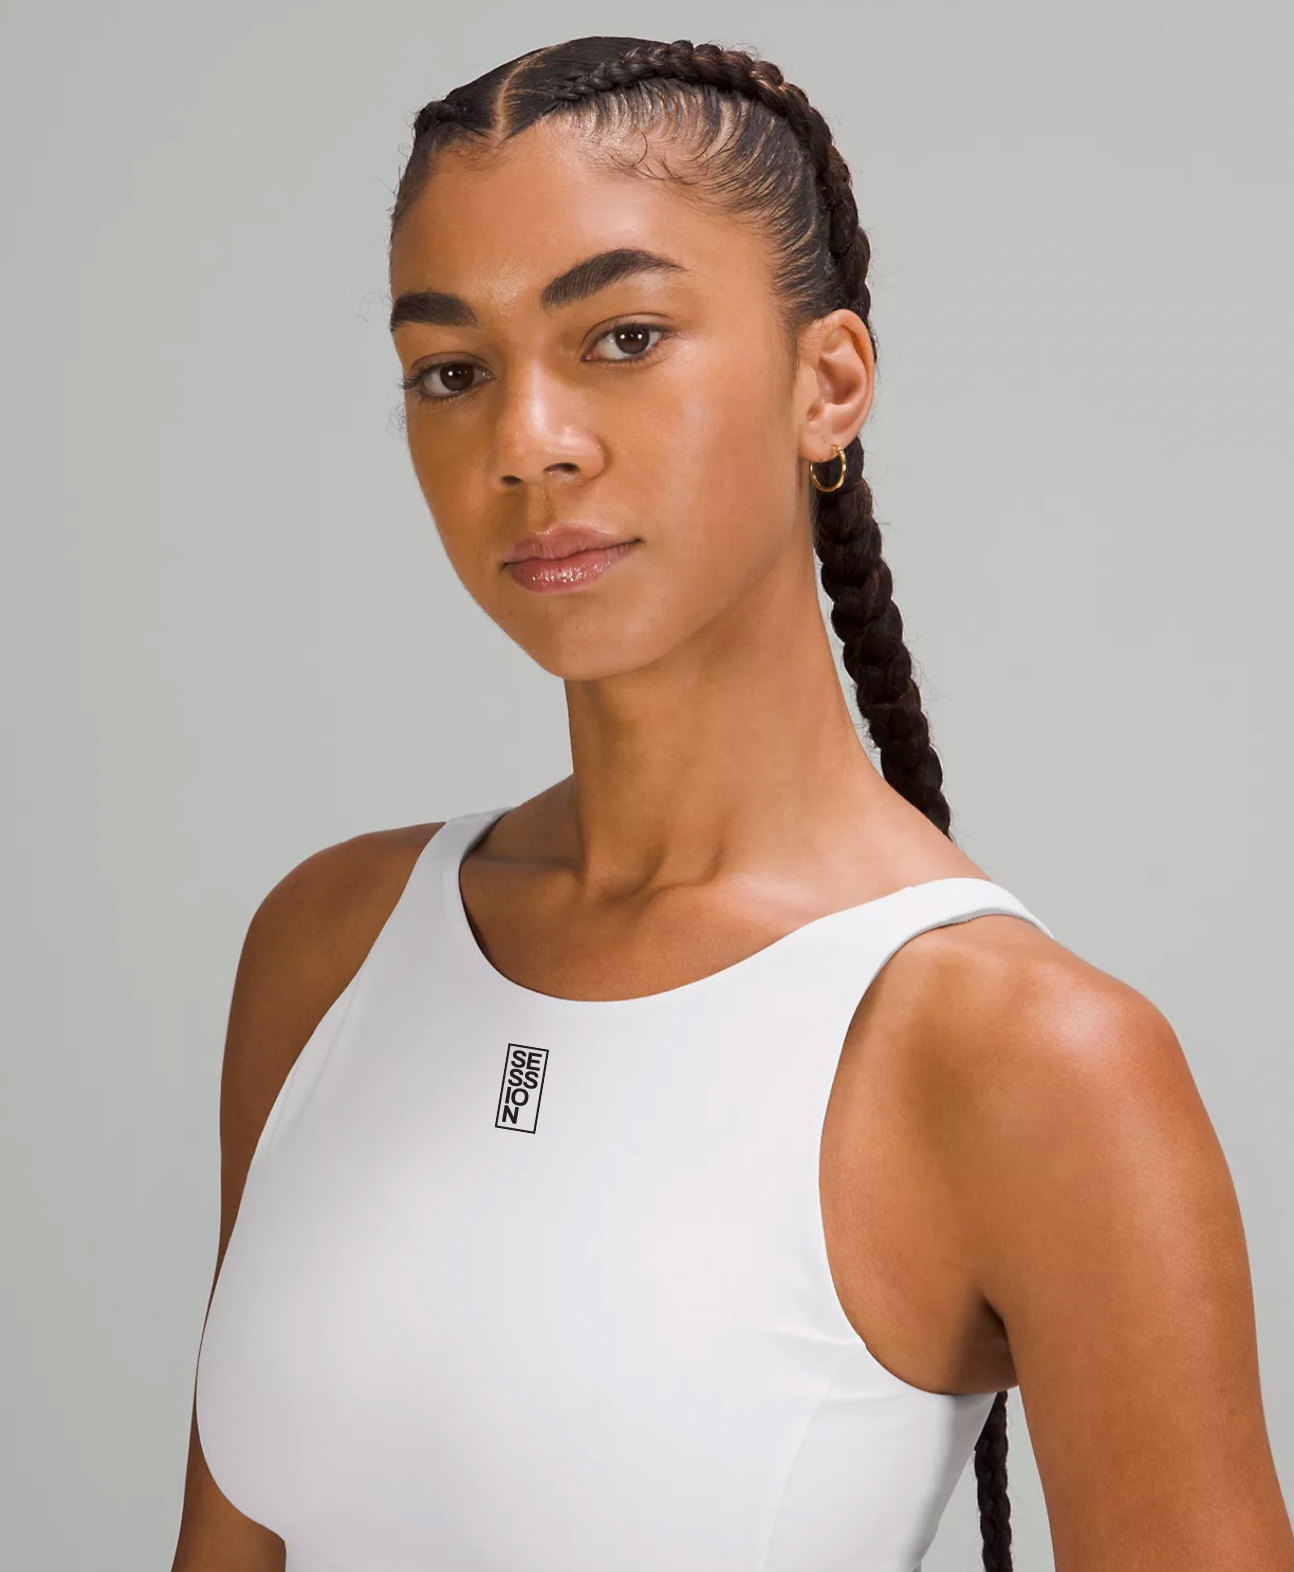 SESSION Align High Neck Tank Top — SESSION